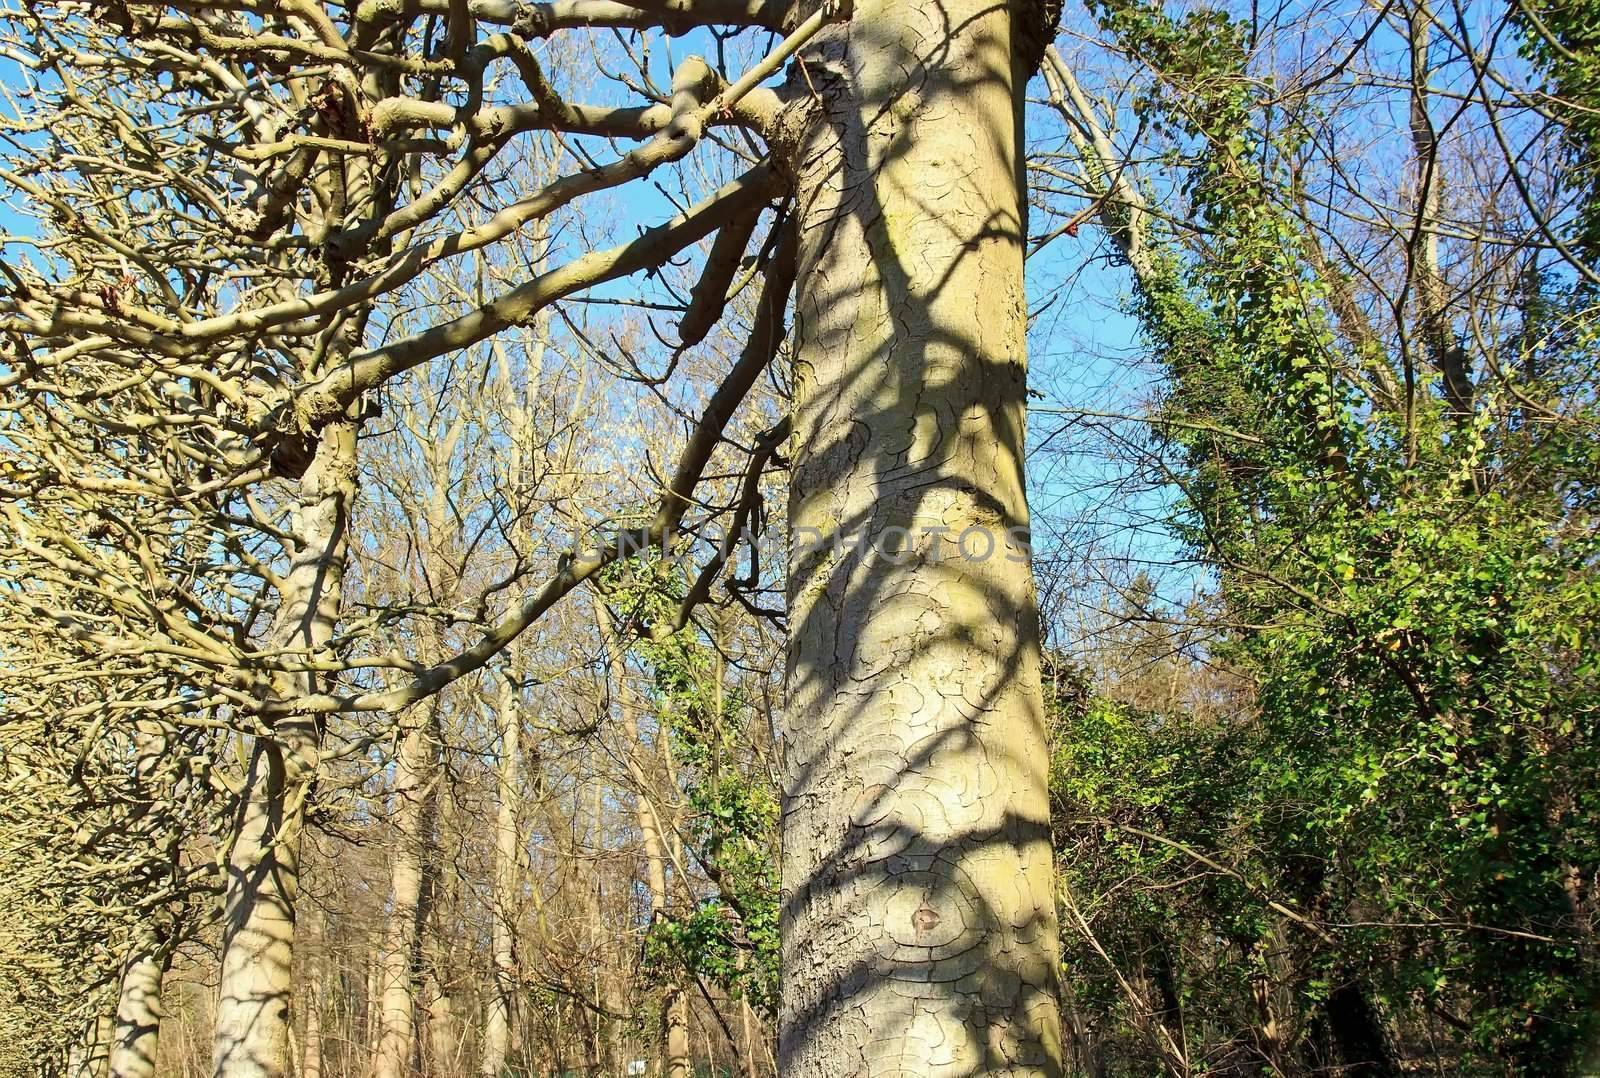 Winter trees, shadows on a trunk, the opposition between the green ivy and the bare branches